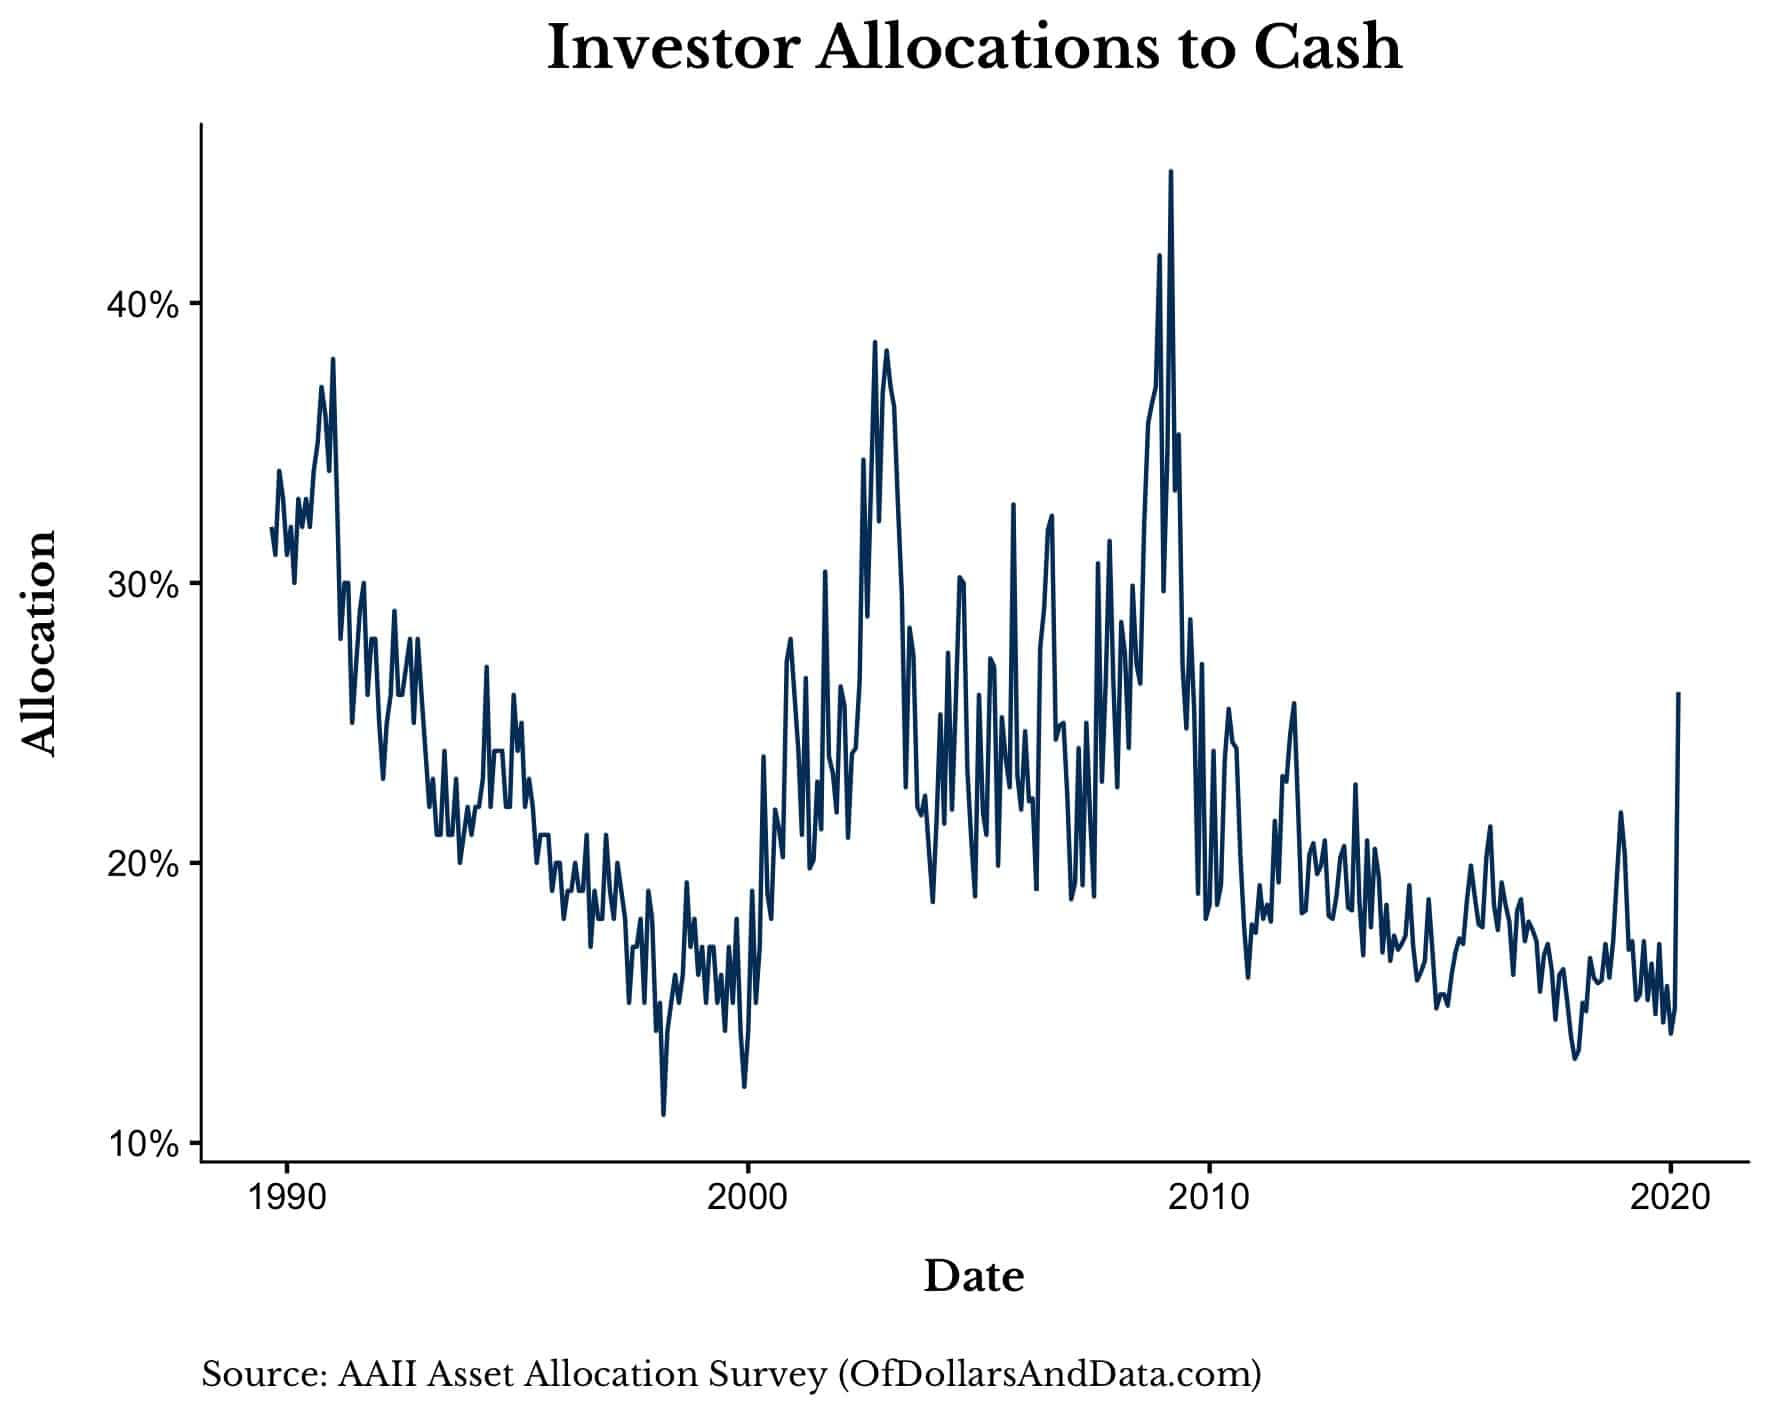 Investor allocations to cash since 1990